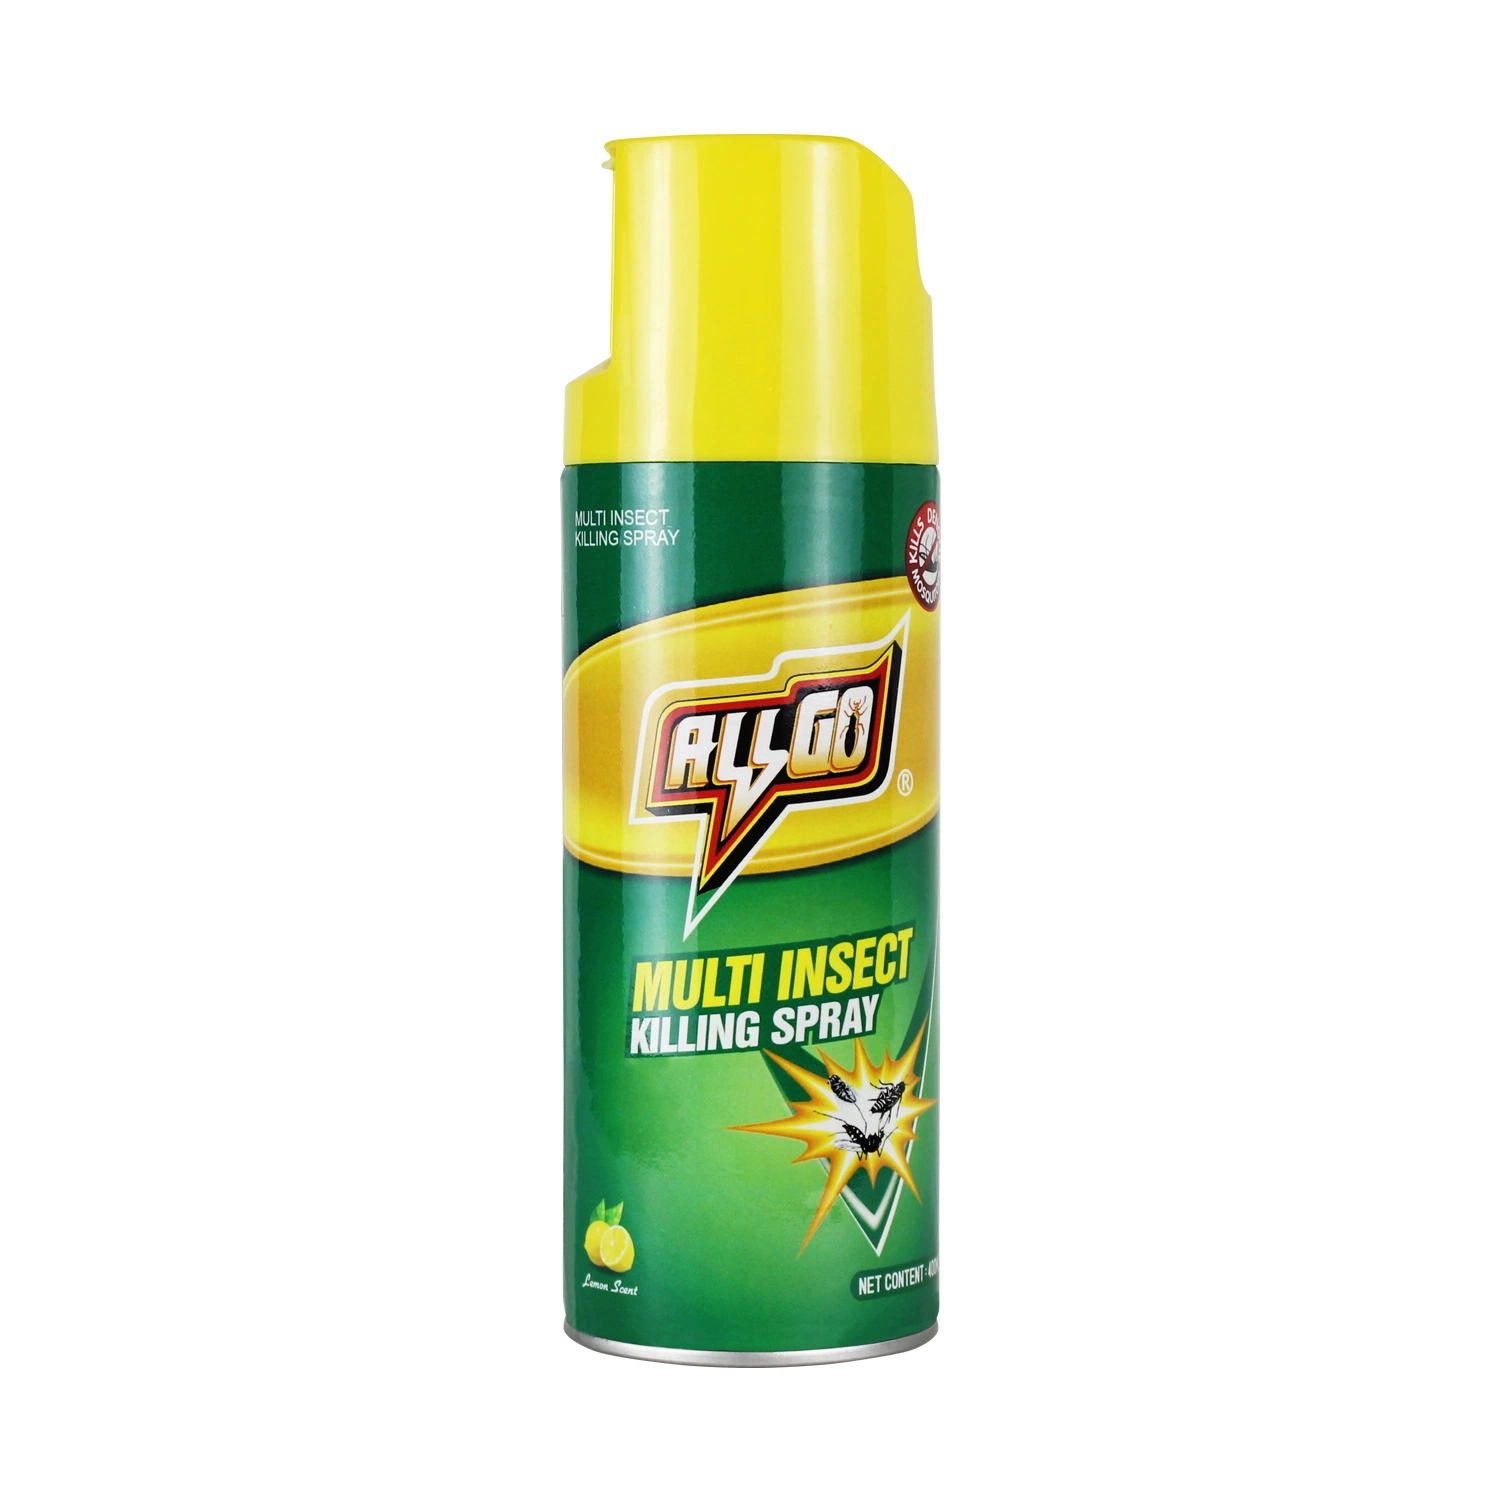 Insects Killing Spray Mosquito Killer Fly Killer Cockroach Killer New Product